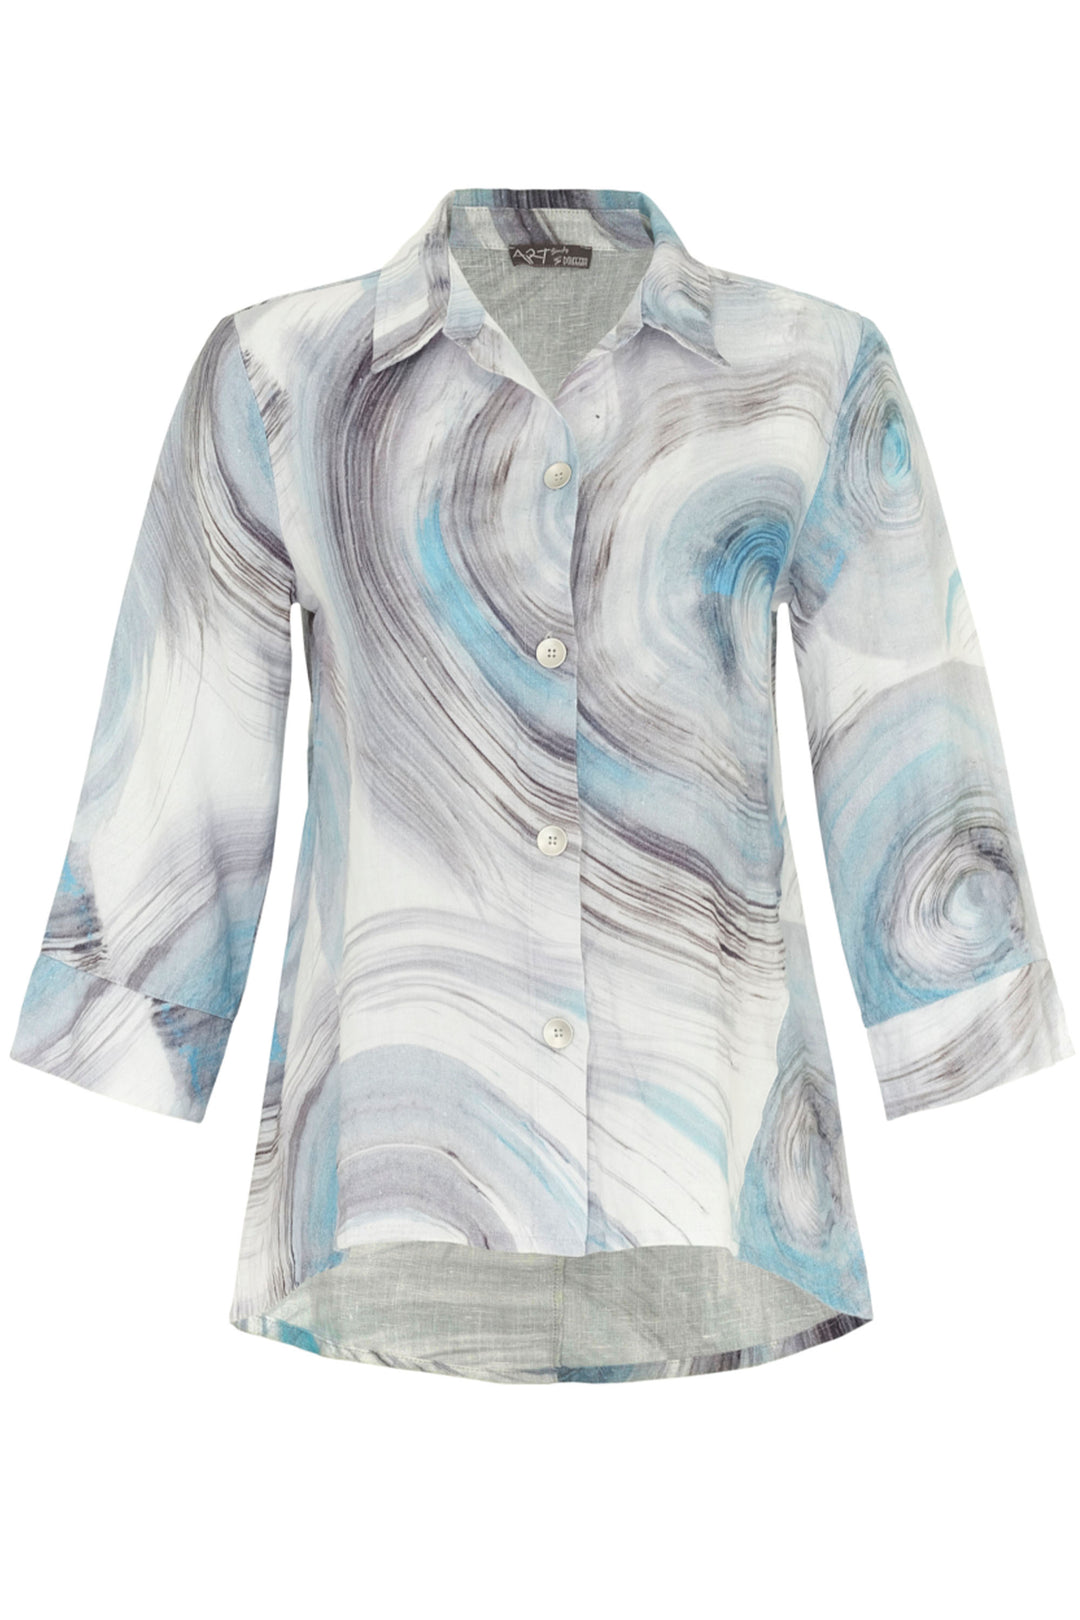 Dolcezza Spring 2024 With 3/4 dolman sleeves and a neat ripple effect design, this blouse-style top is perfect for both casual and elegant occasions. 